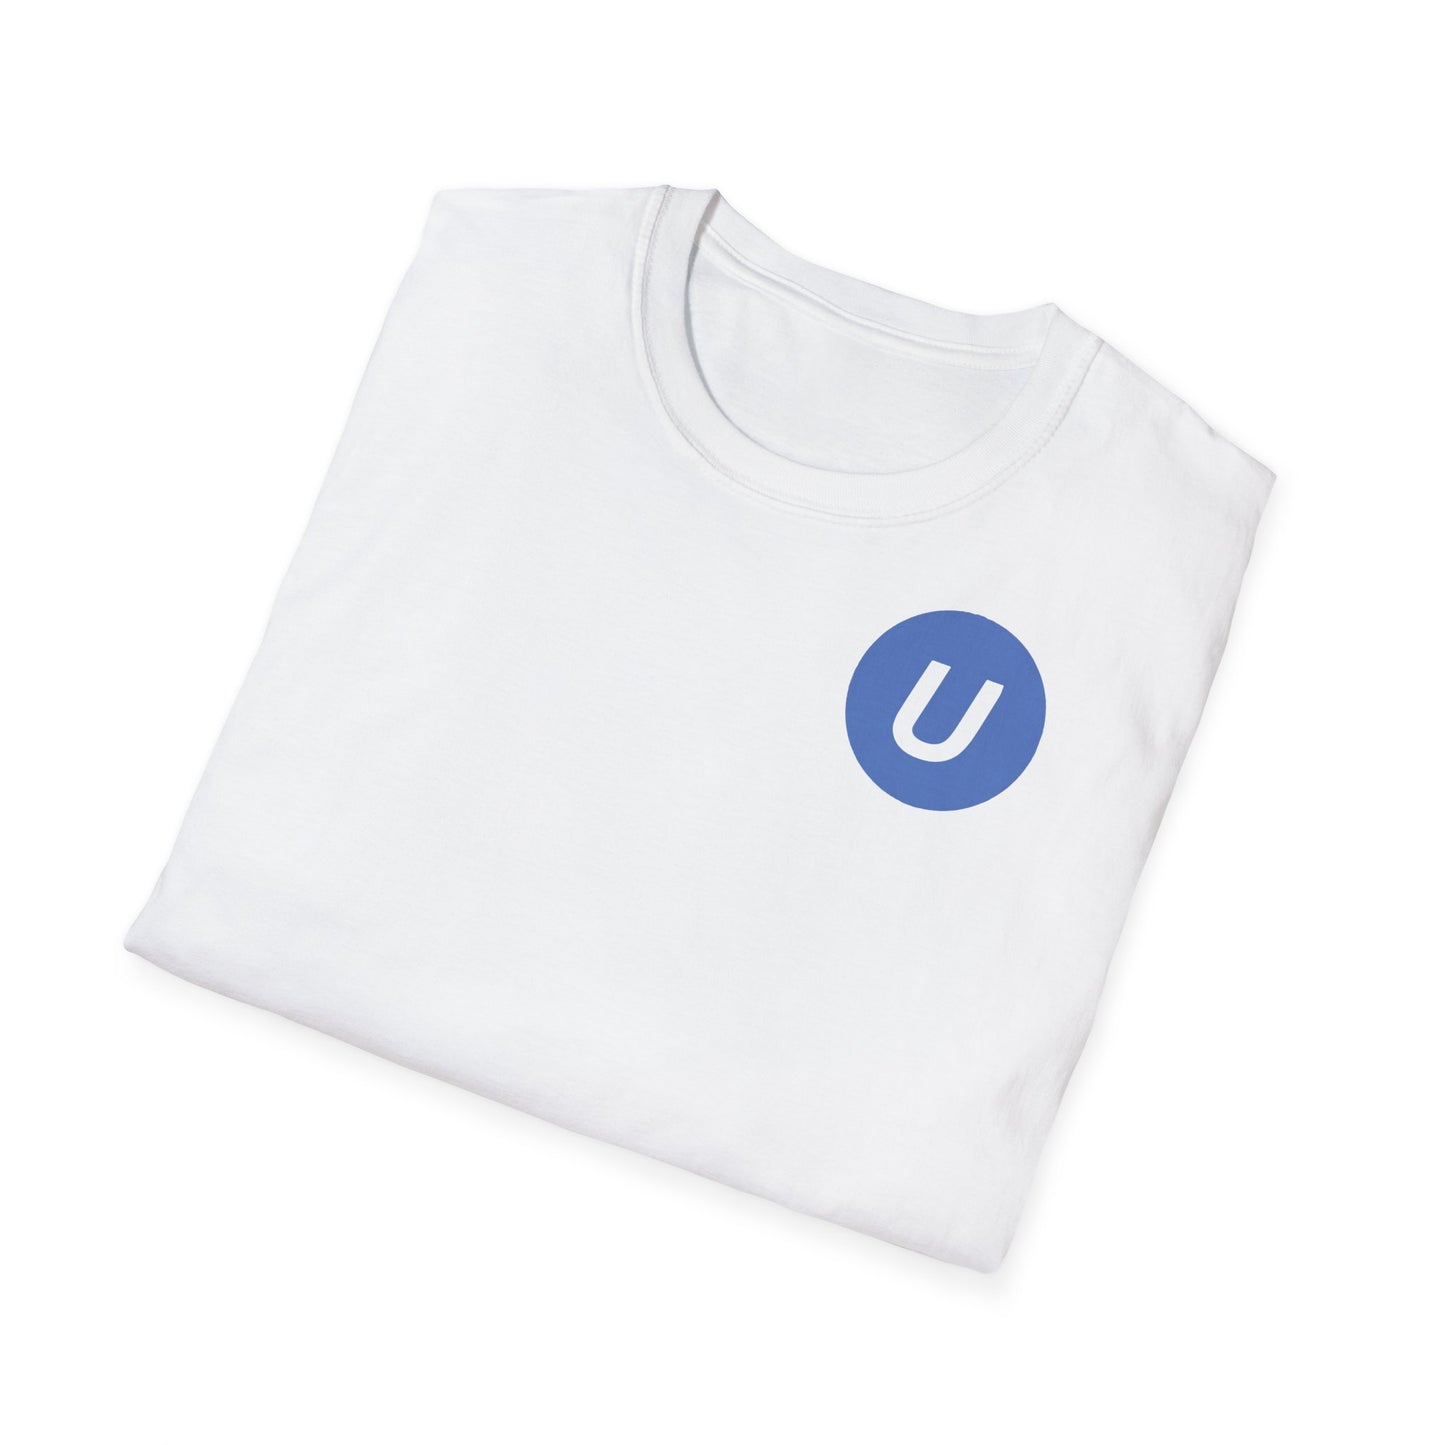 Clothing - UnrealIRCd "Ask me about my IRC server" Unisex Softstyle T-Shirt